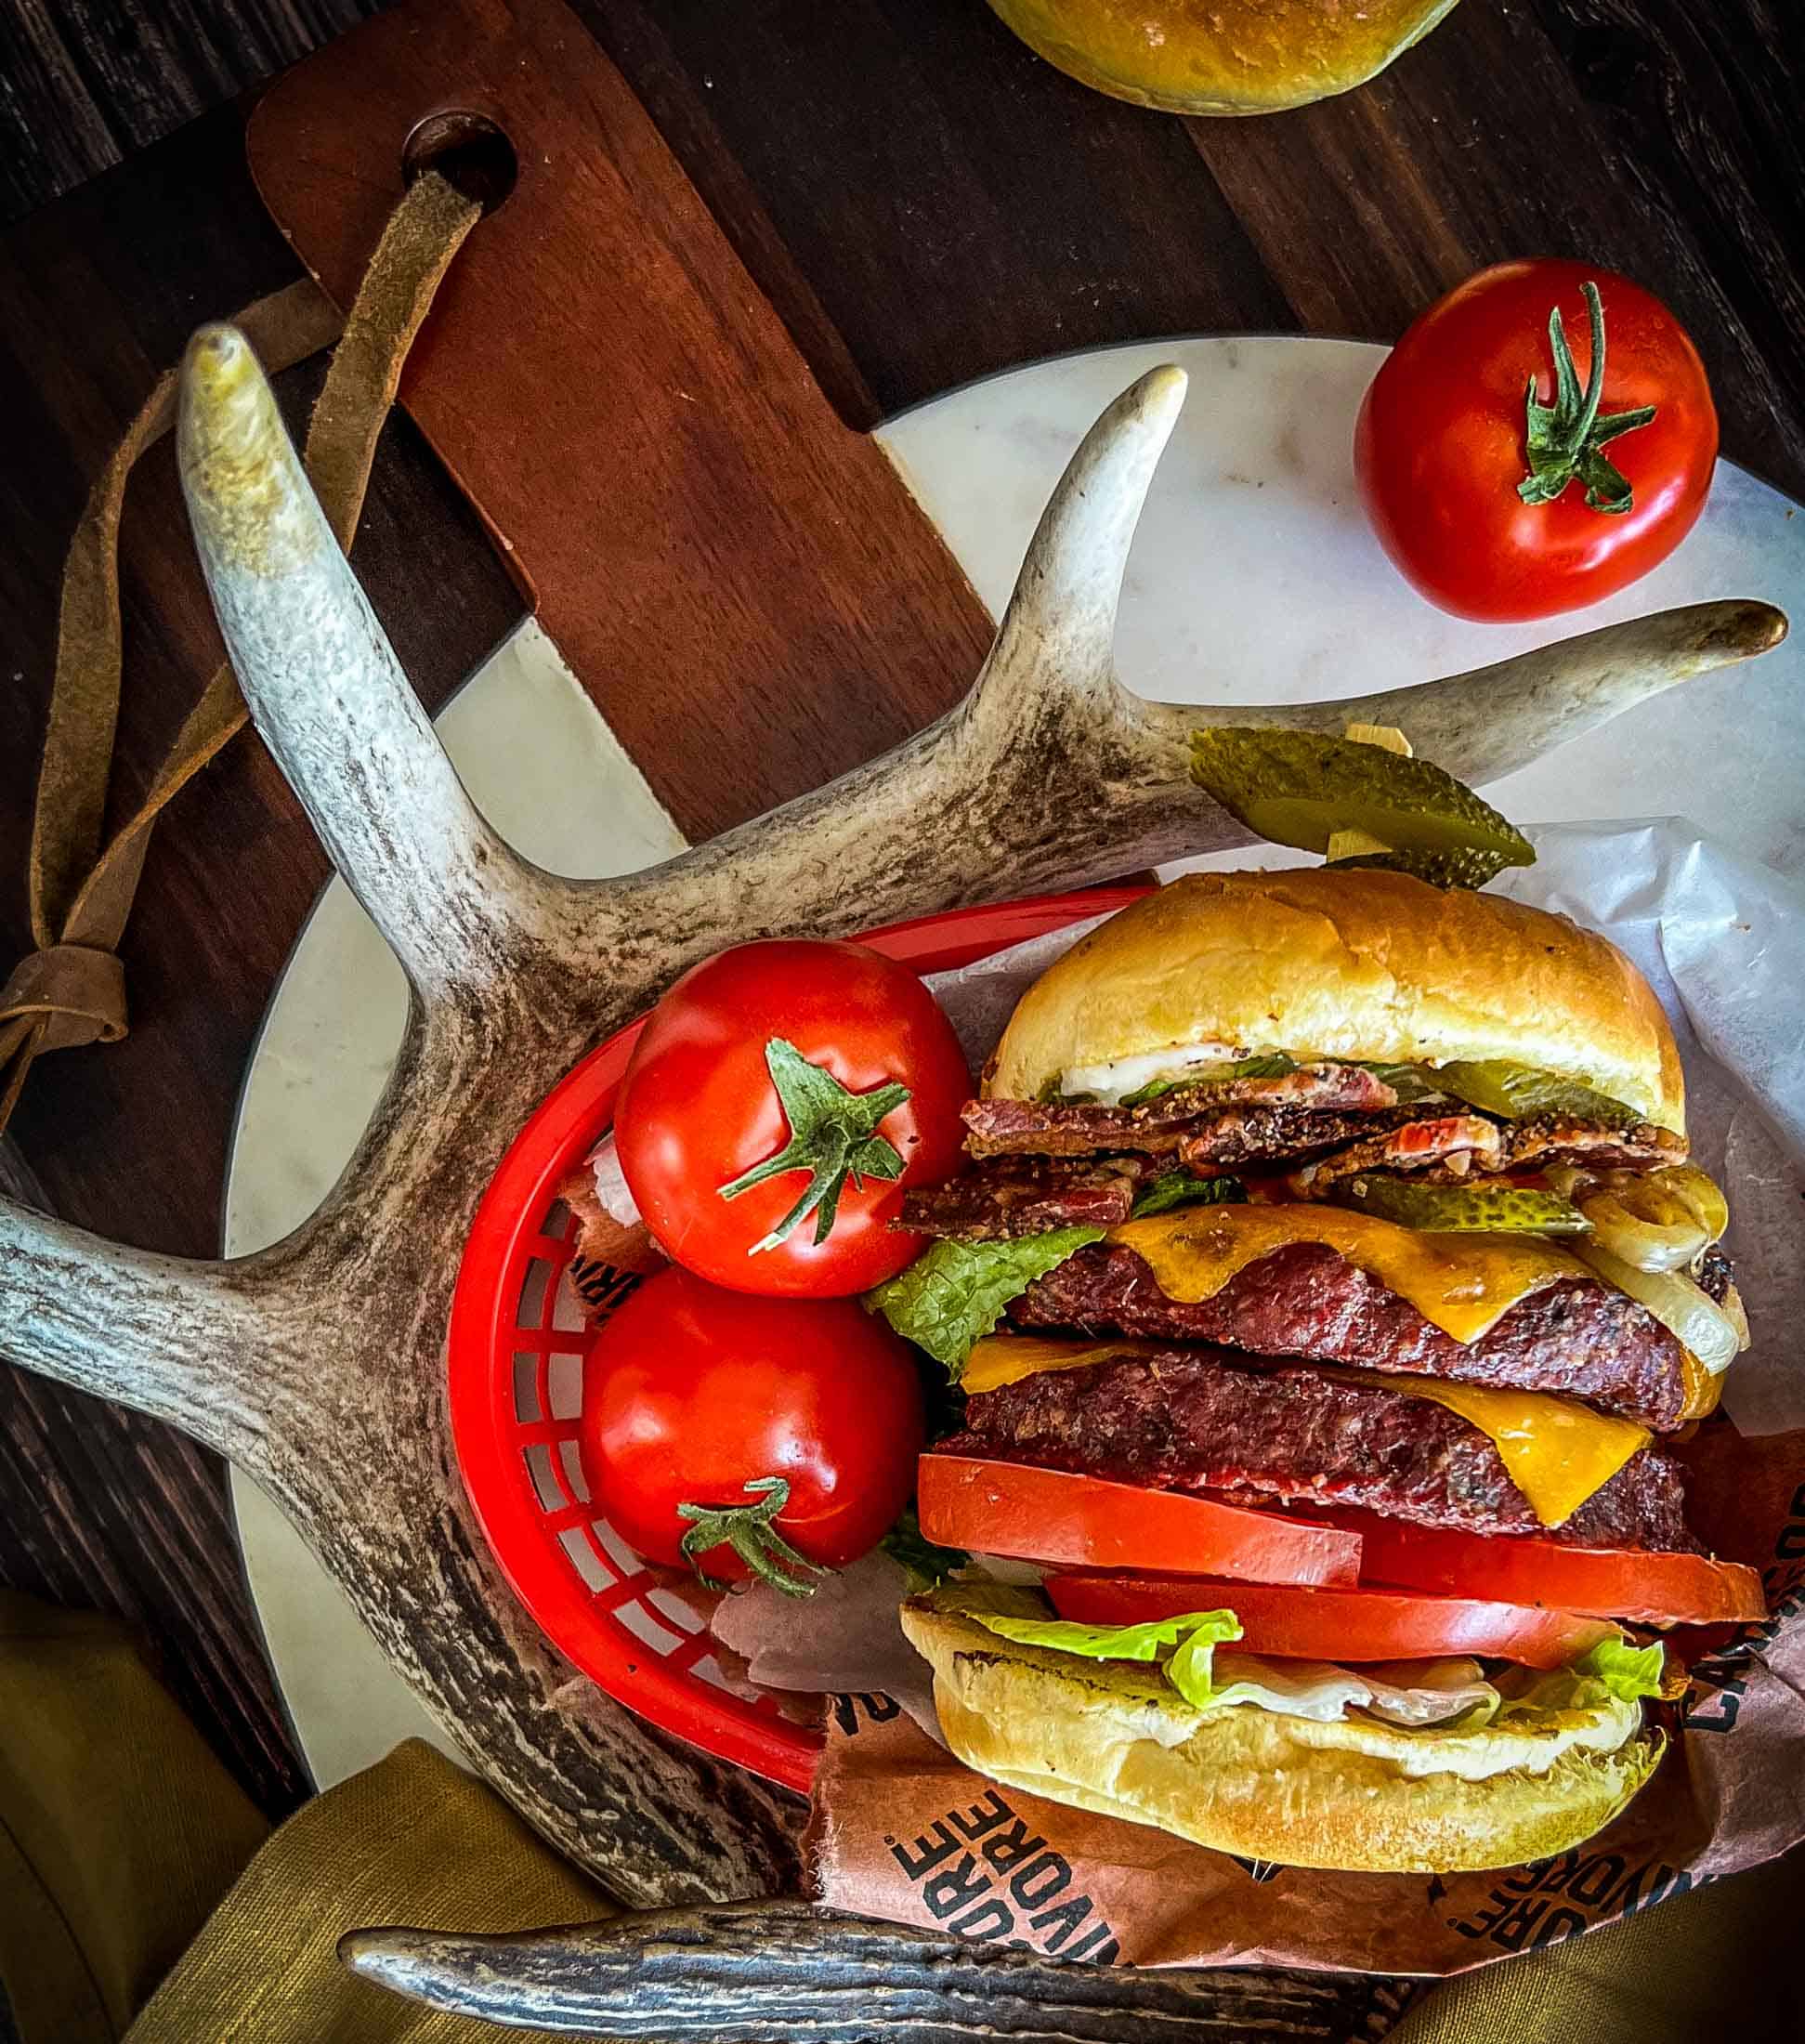 Deer burgers stacked together with cheese melted on top, sandwiched in between two buns and a lot of burger toppings.